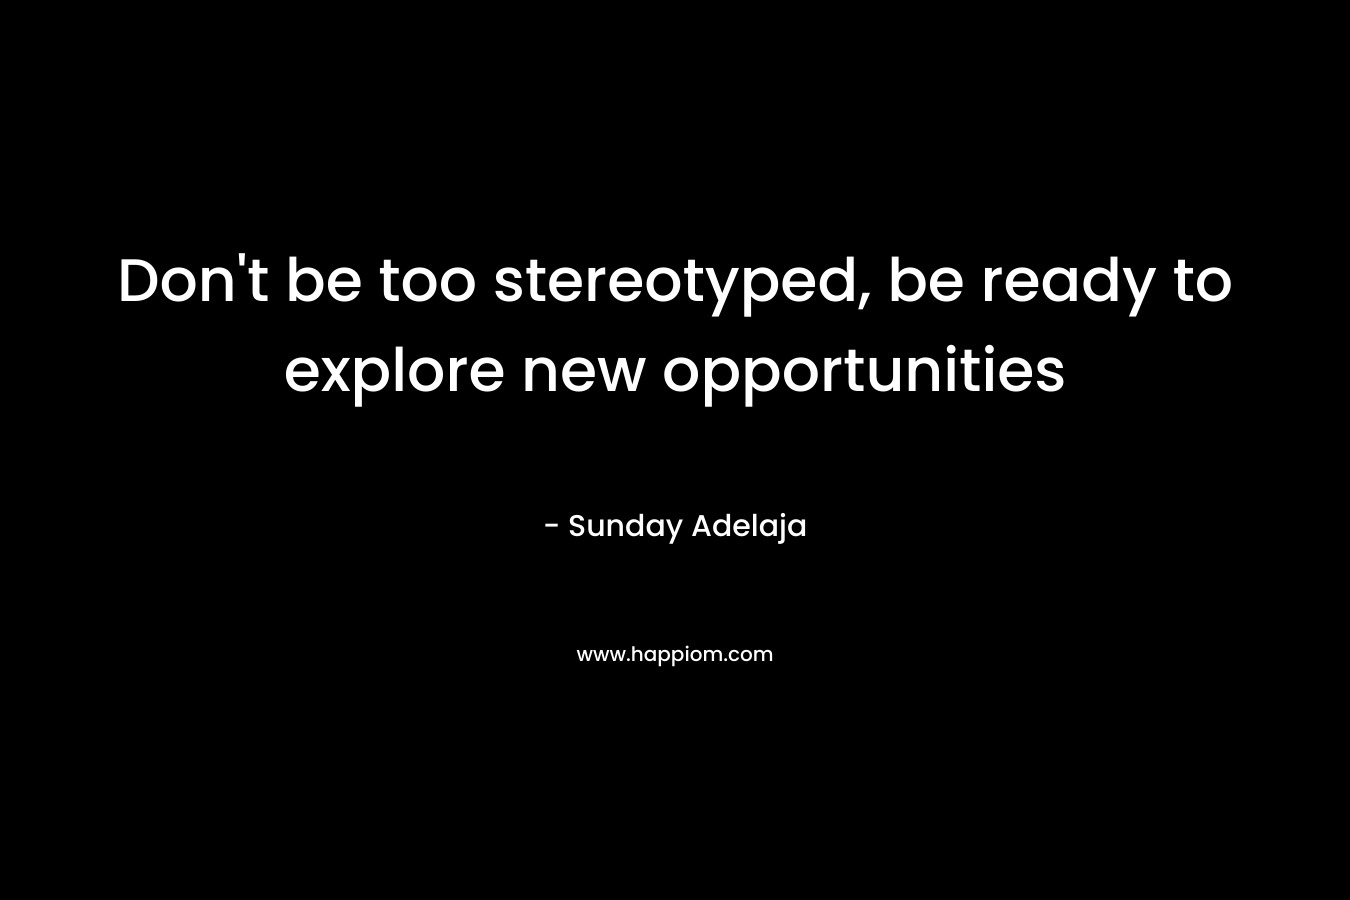 Don't be too stereotyped, be ready to explore new opportunities